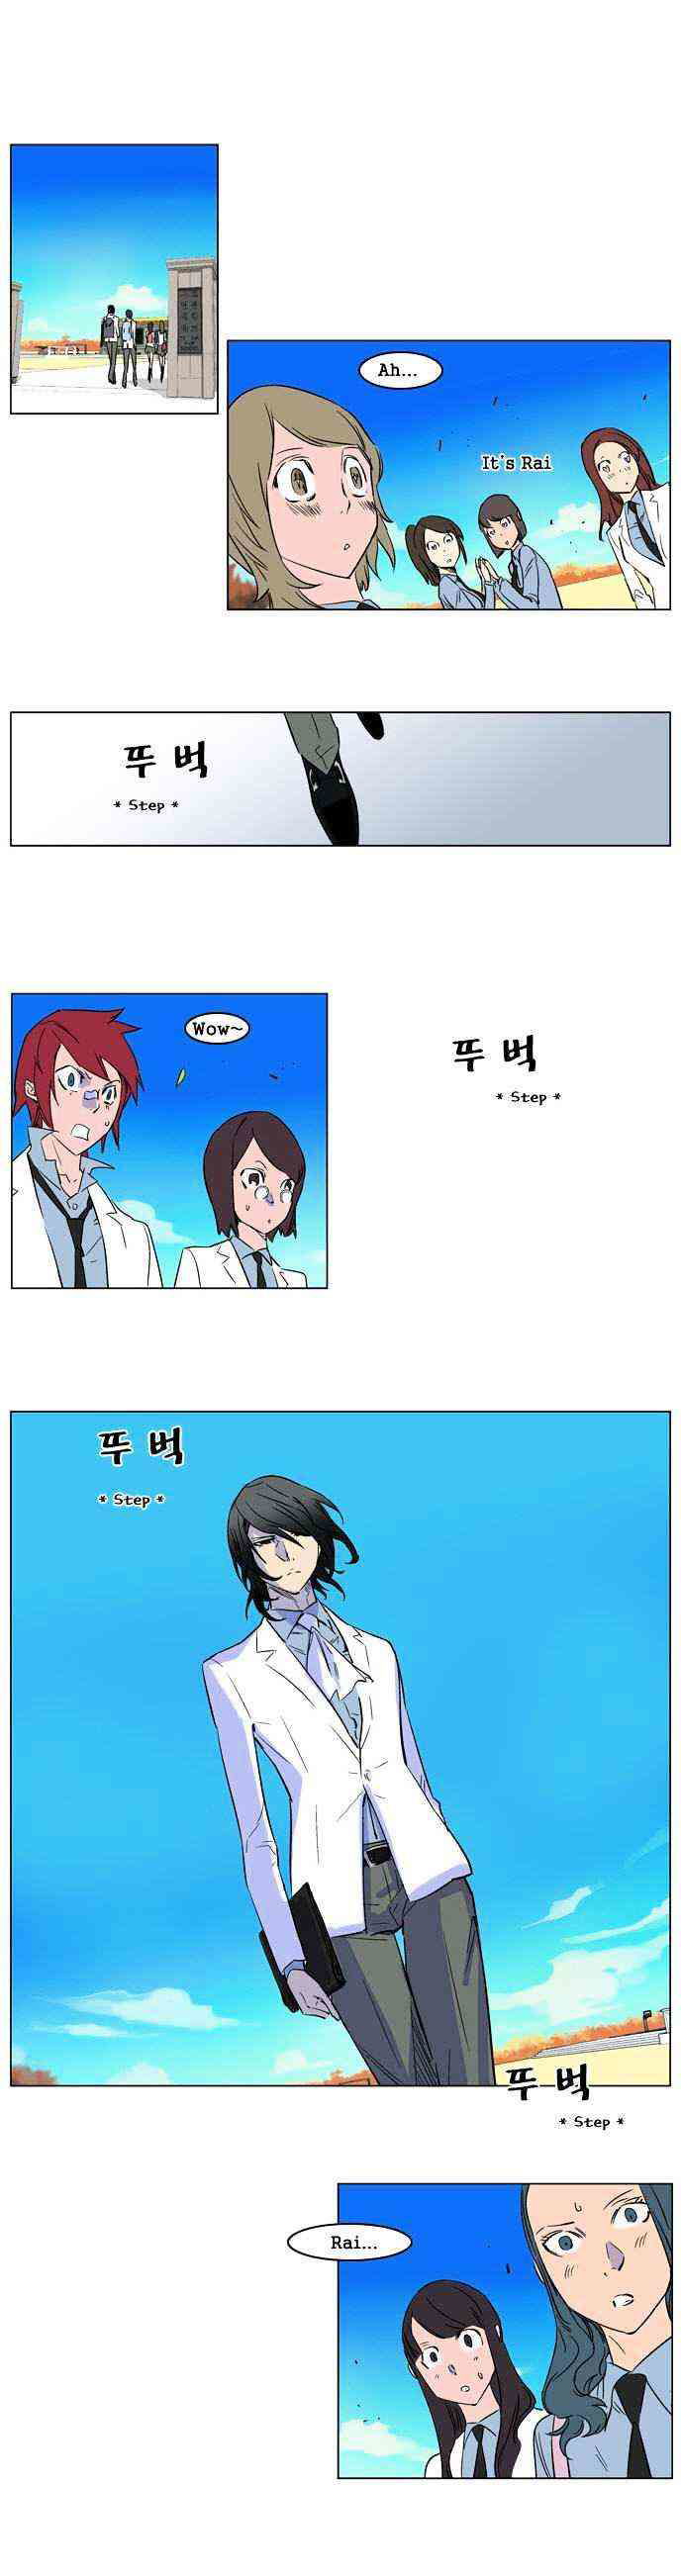 Noblesse Chapter 175.5 _ Attention Please. Note 10. Suitabl page 4